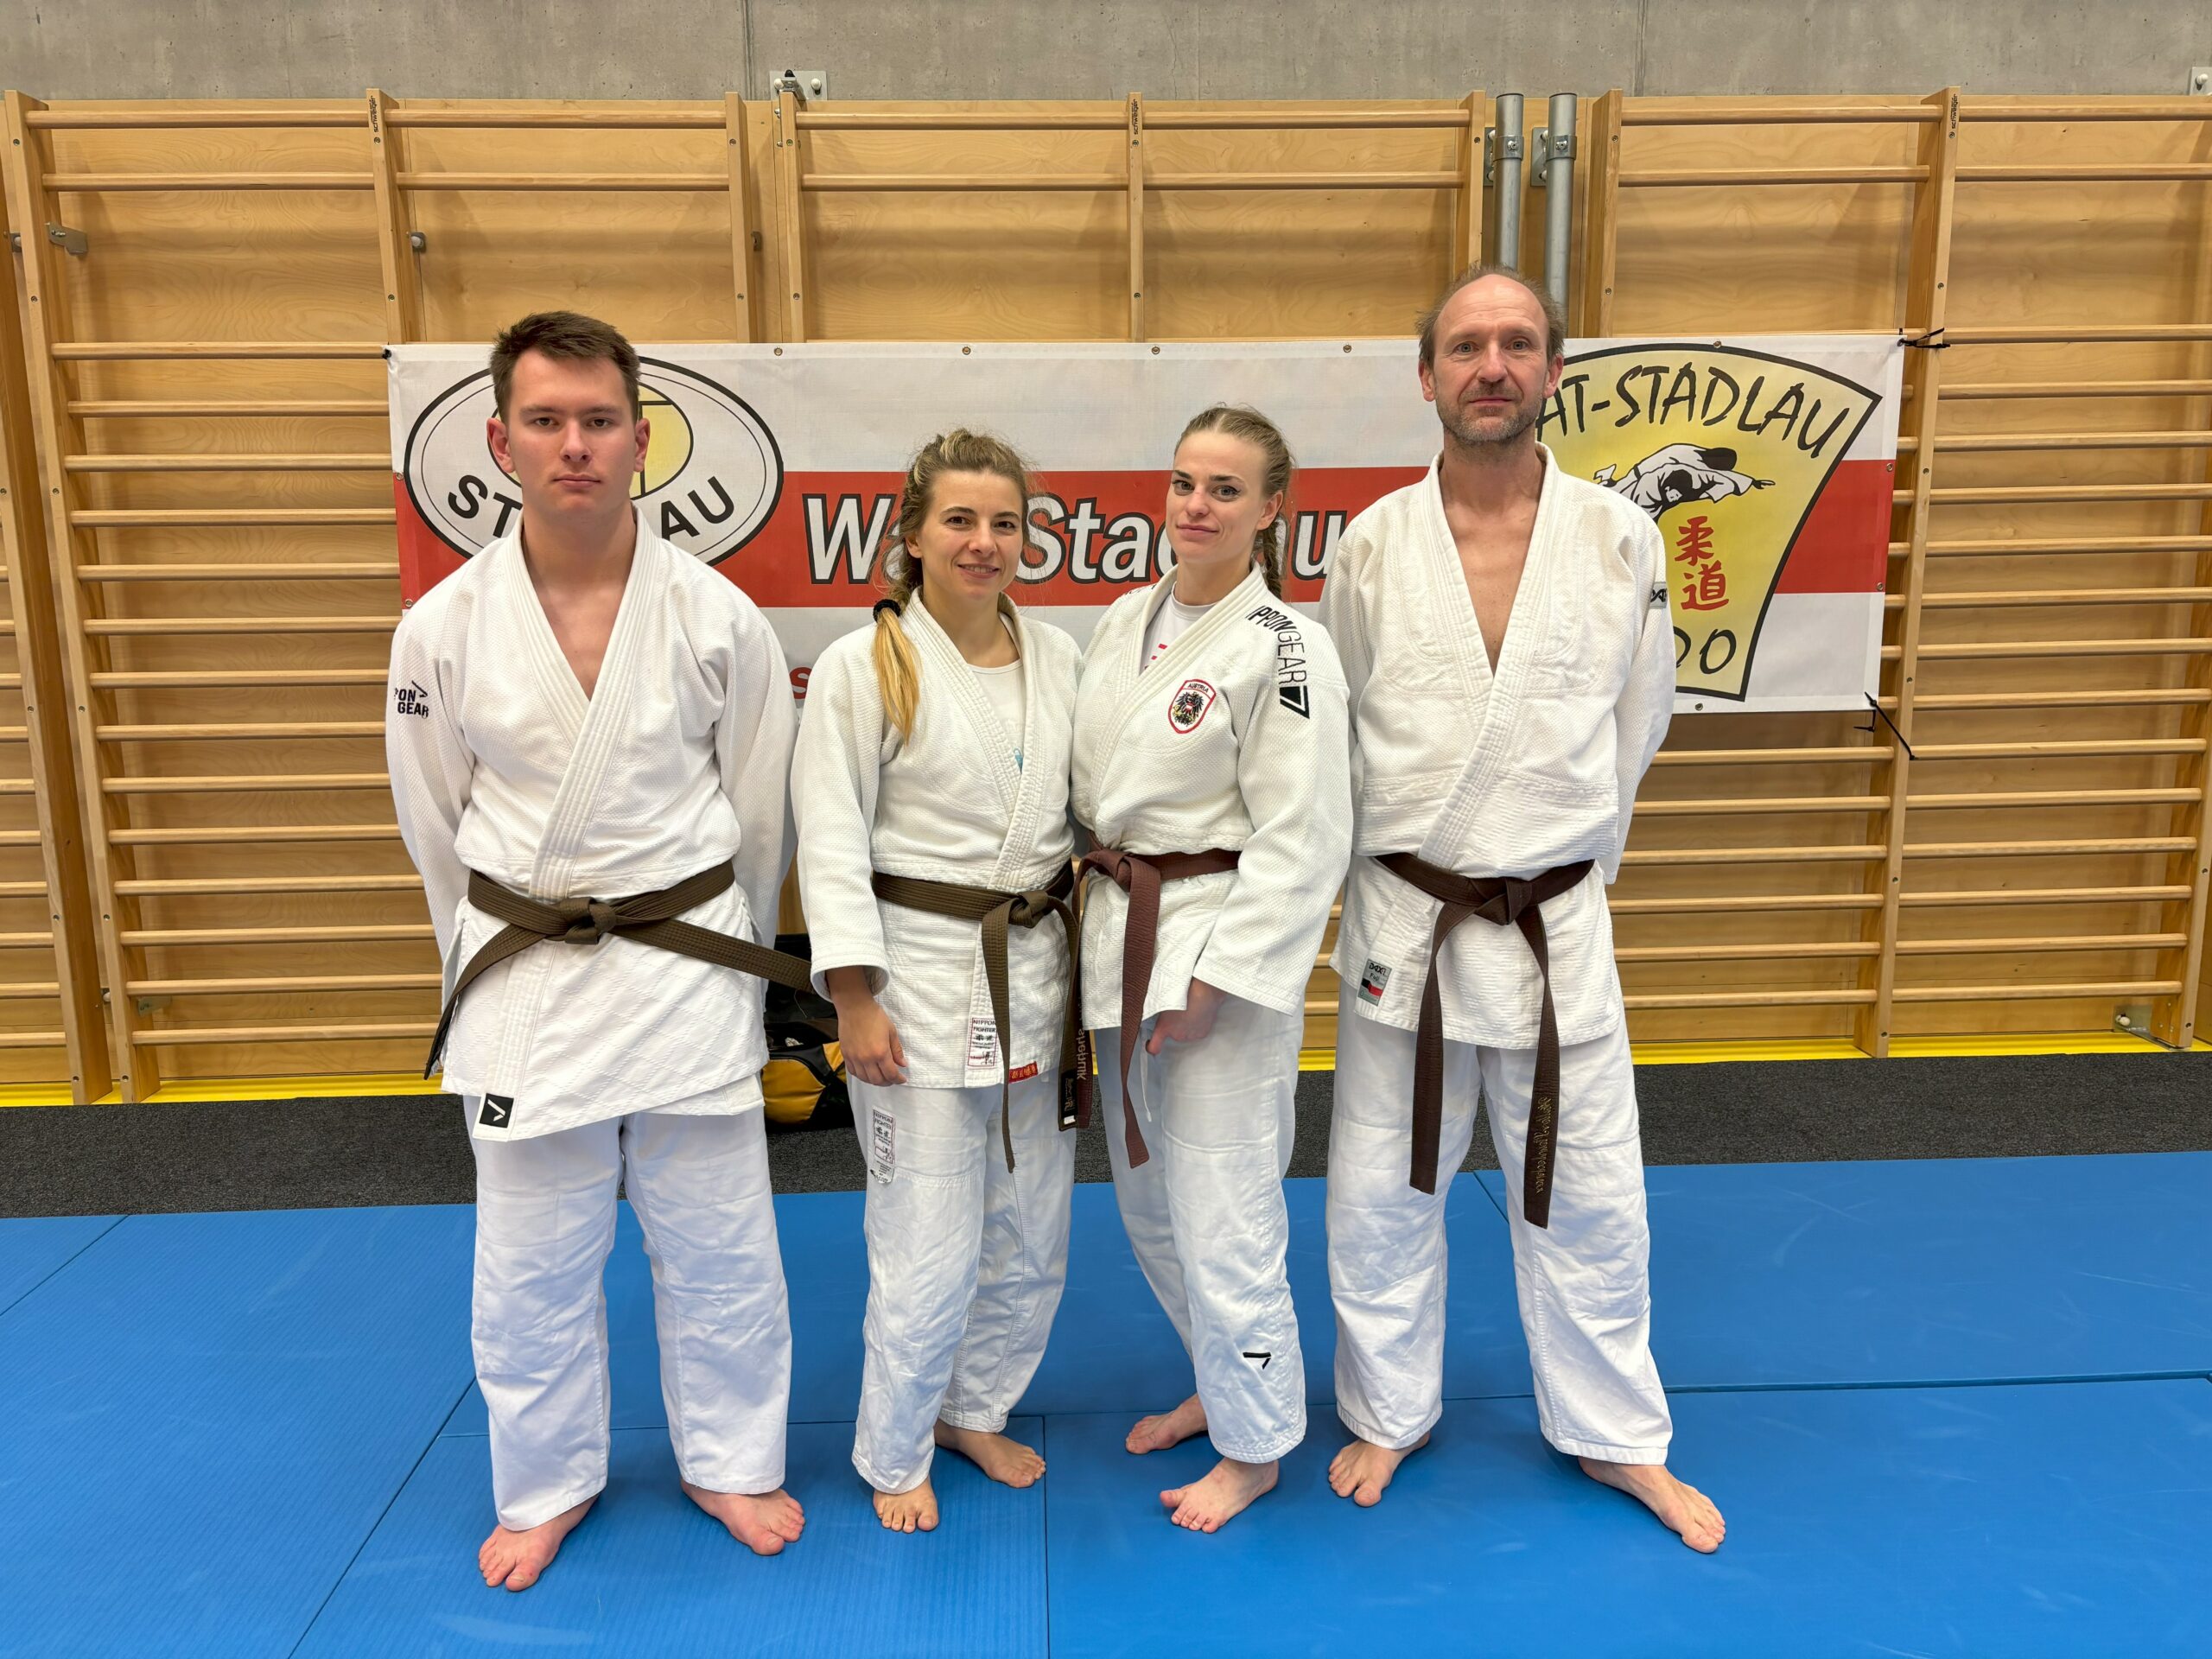 You are currently viewing Kata Seminar Wien